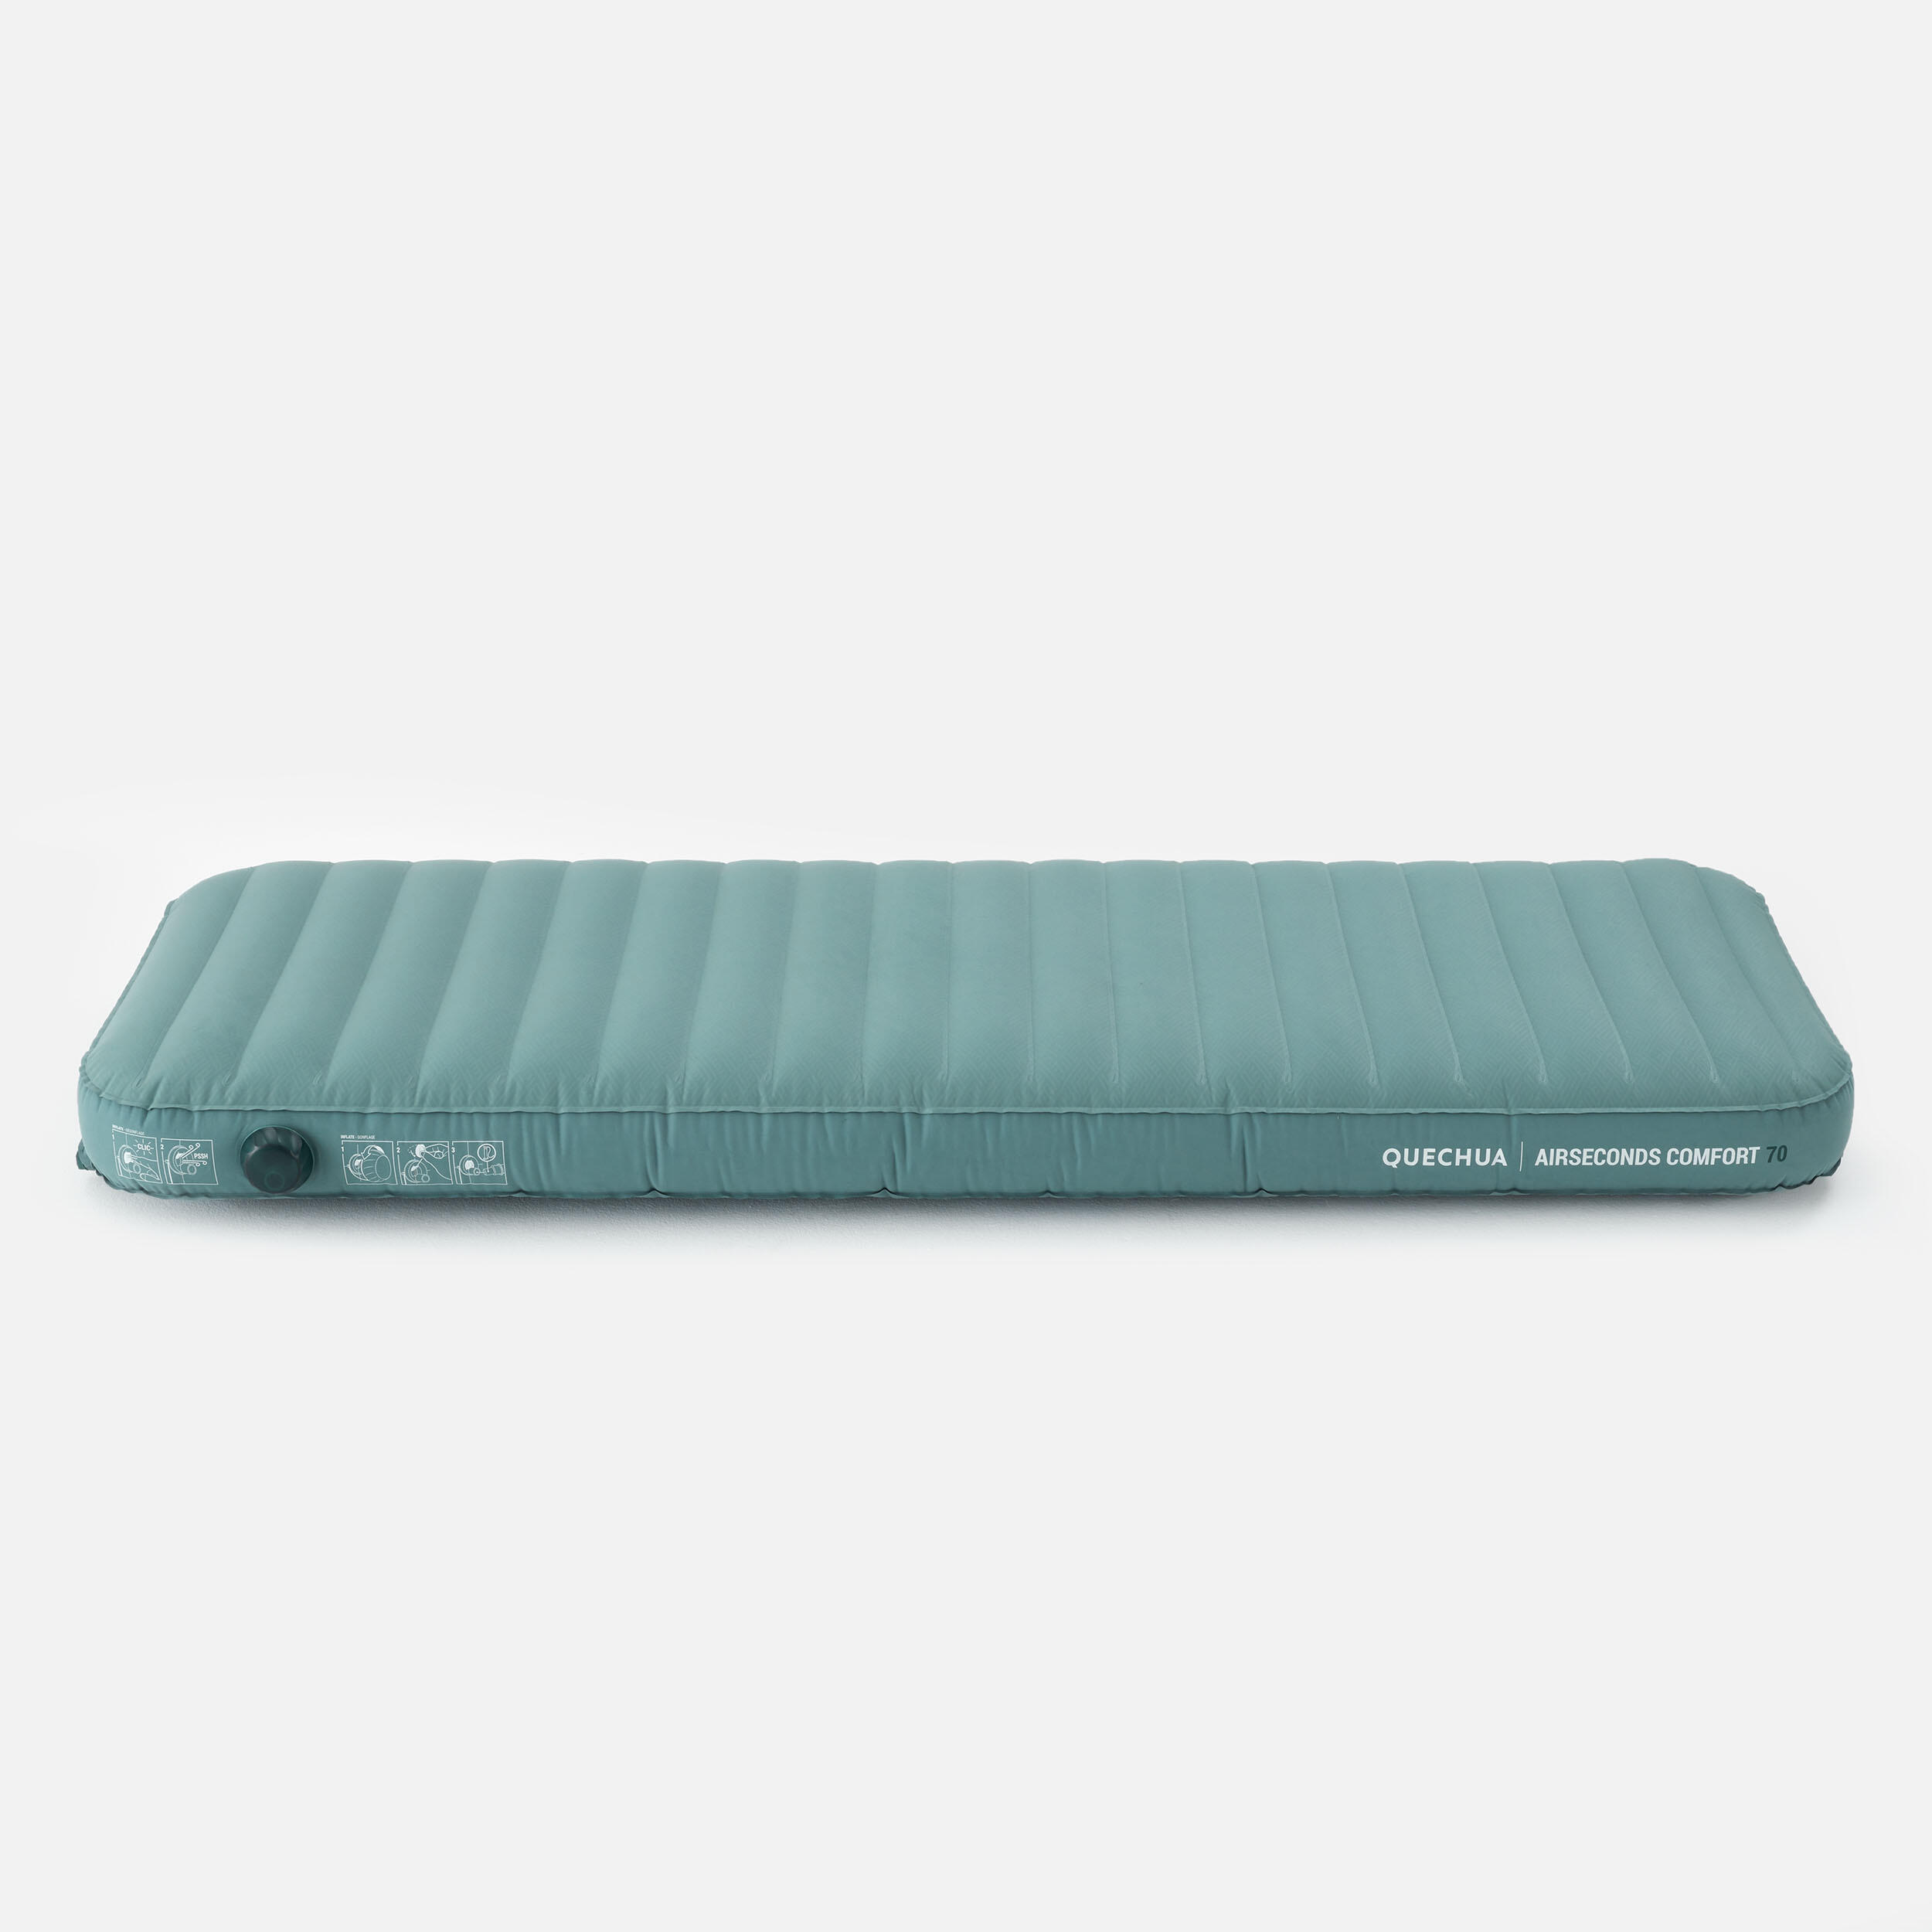 INFLATABLE CAMPING MATTRESS - AIR SECONDS COMFORT 70 CM - 1 PERSON 6/9